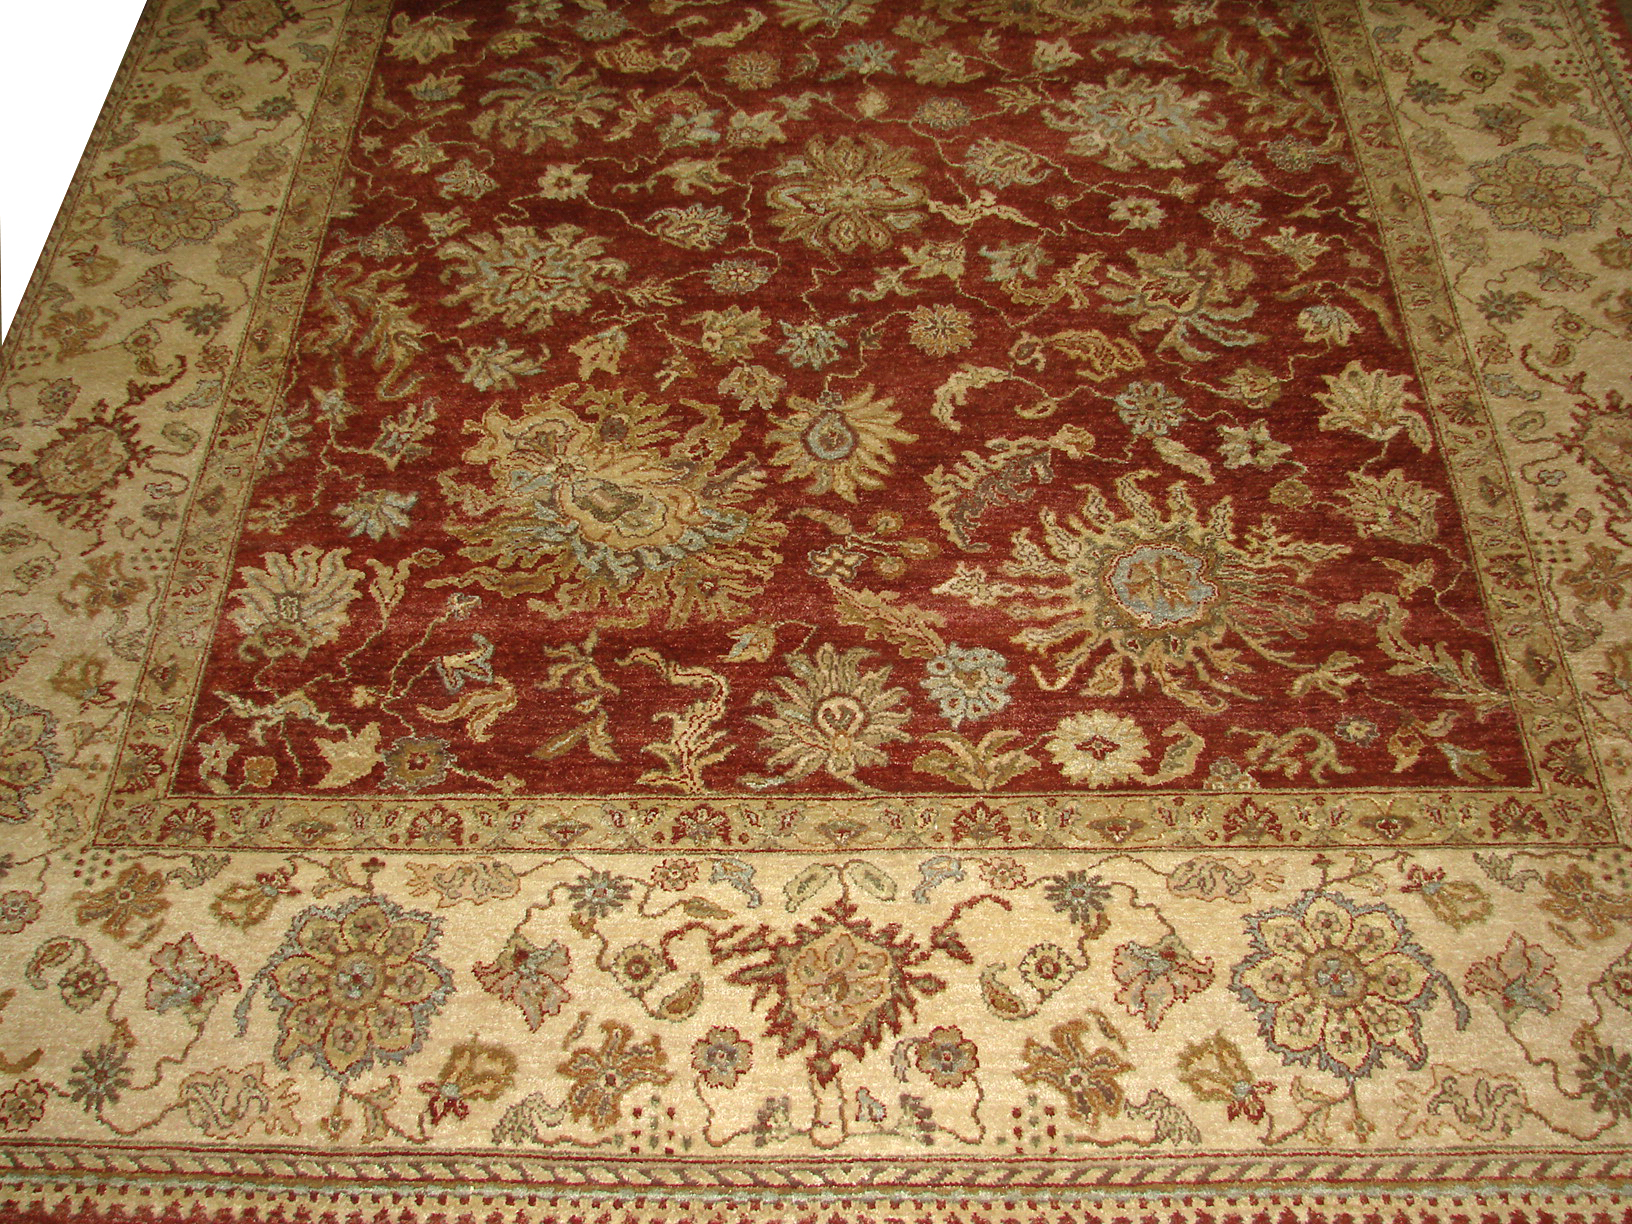 Clearance & Discount Rugs Hand Knotted Wool Rug 8769 Red - Burgundy & Ivory - Beige Hand Knotted Rug